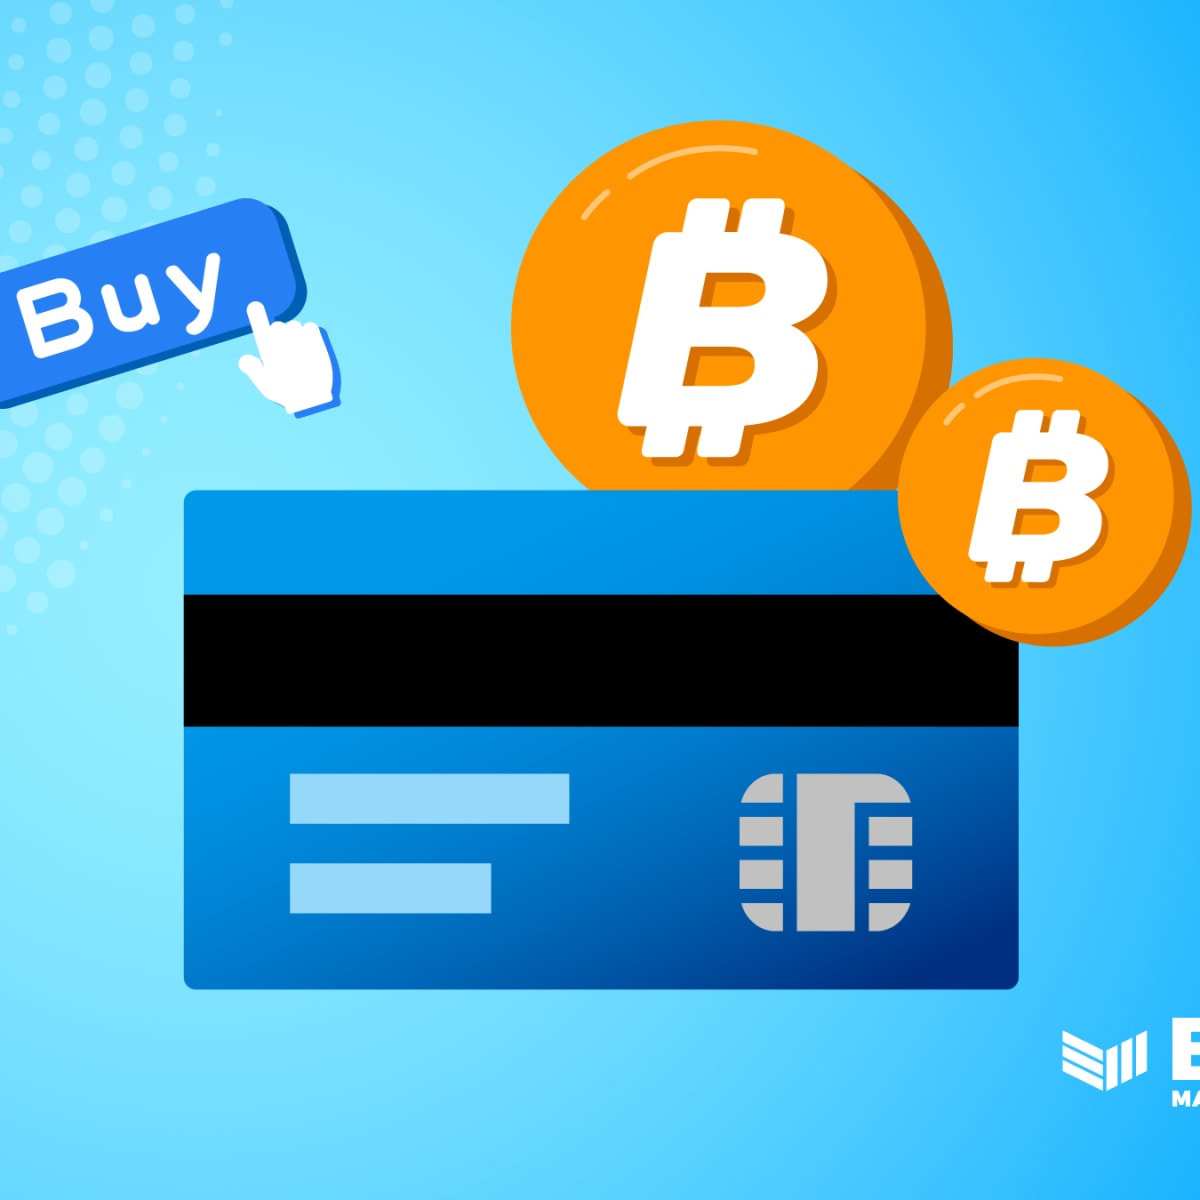 Buy Bitcoin instantly with debit or credit card in Europe